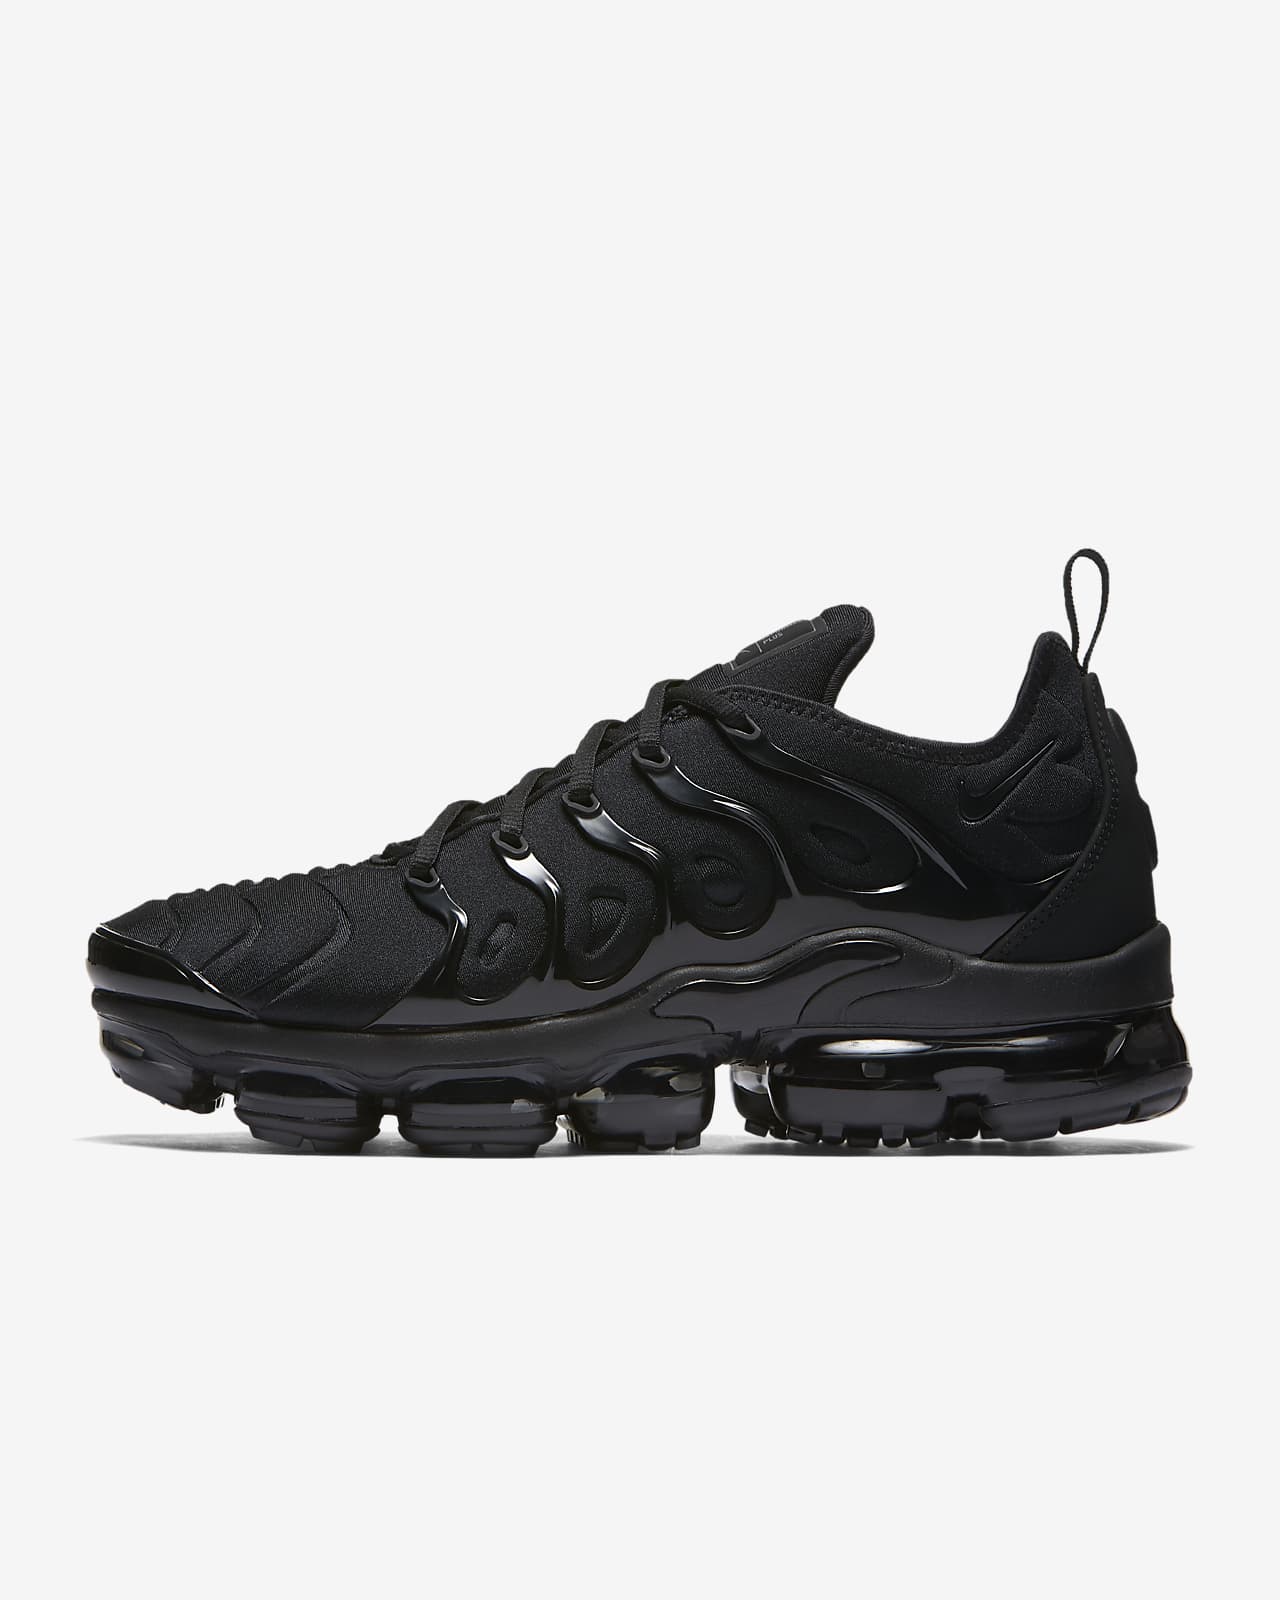 when did the nike vapormax plus come out